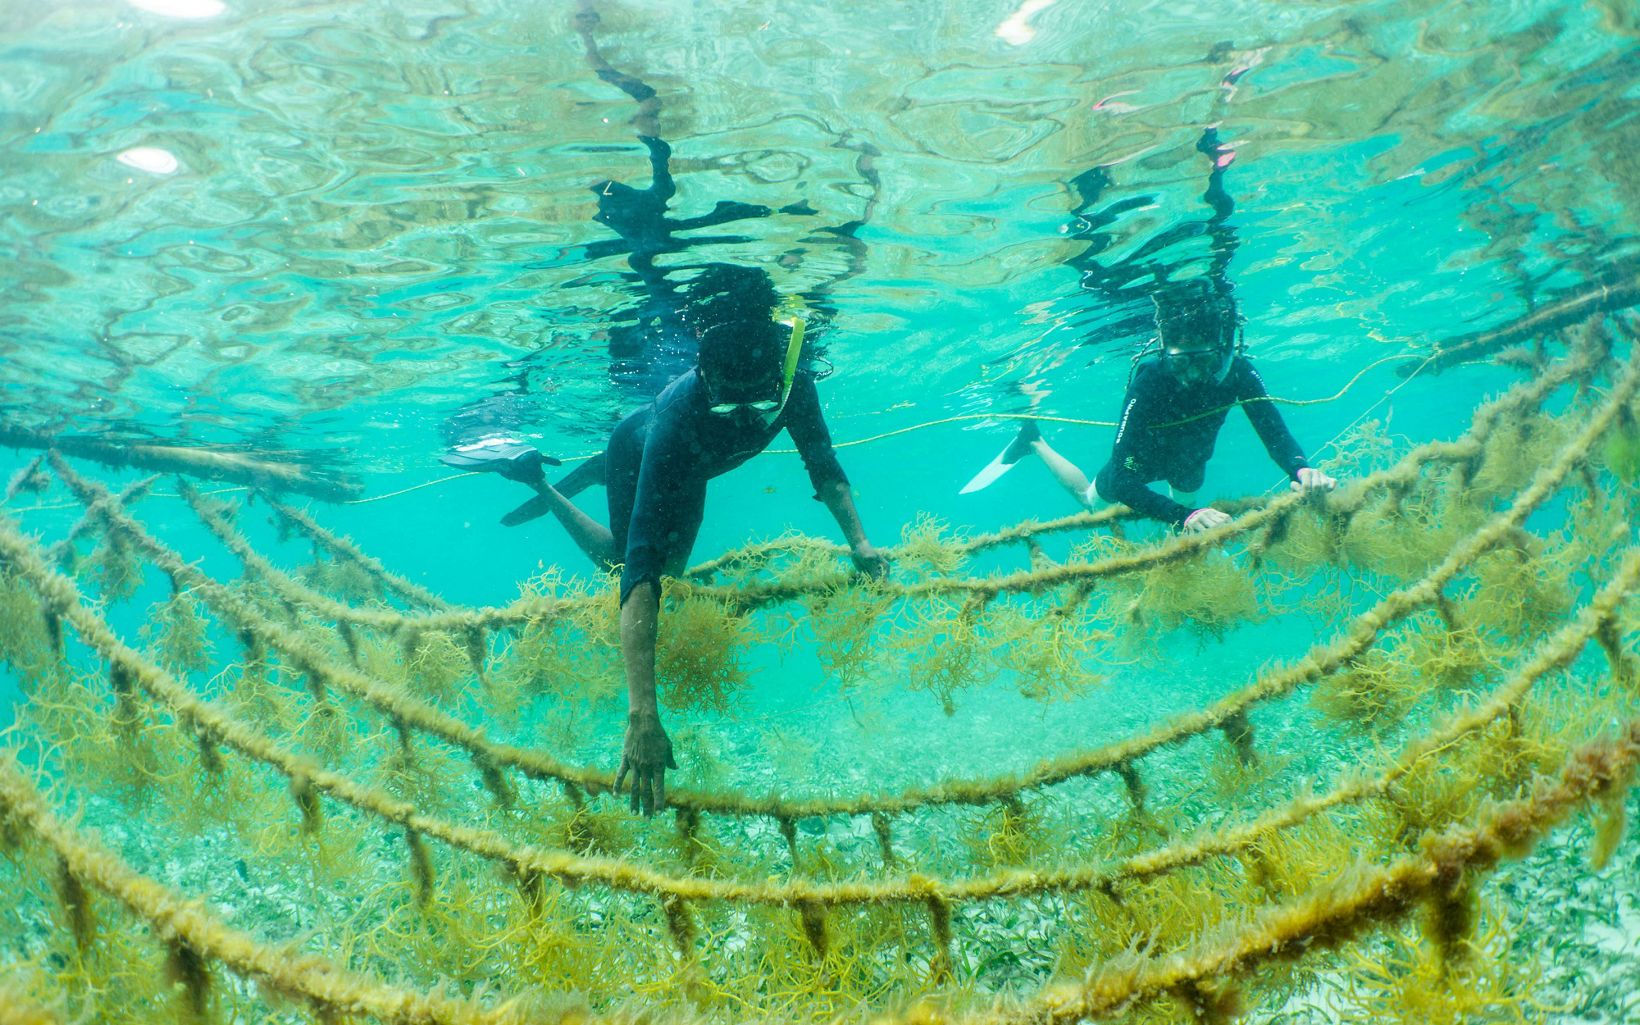 Mariko Wallen and Louis Godfrey tend to the seaweed on their farm in Placencia, Belize.